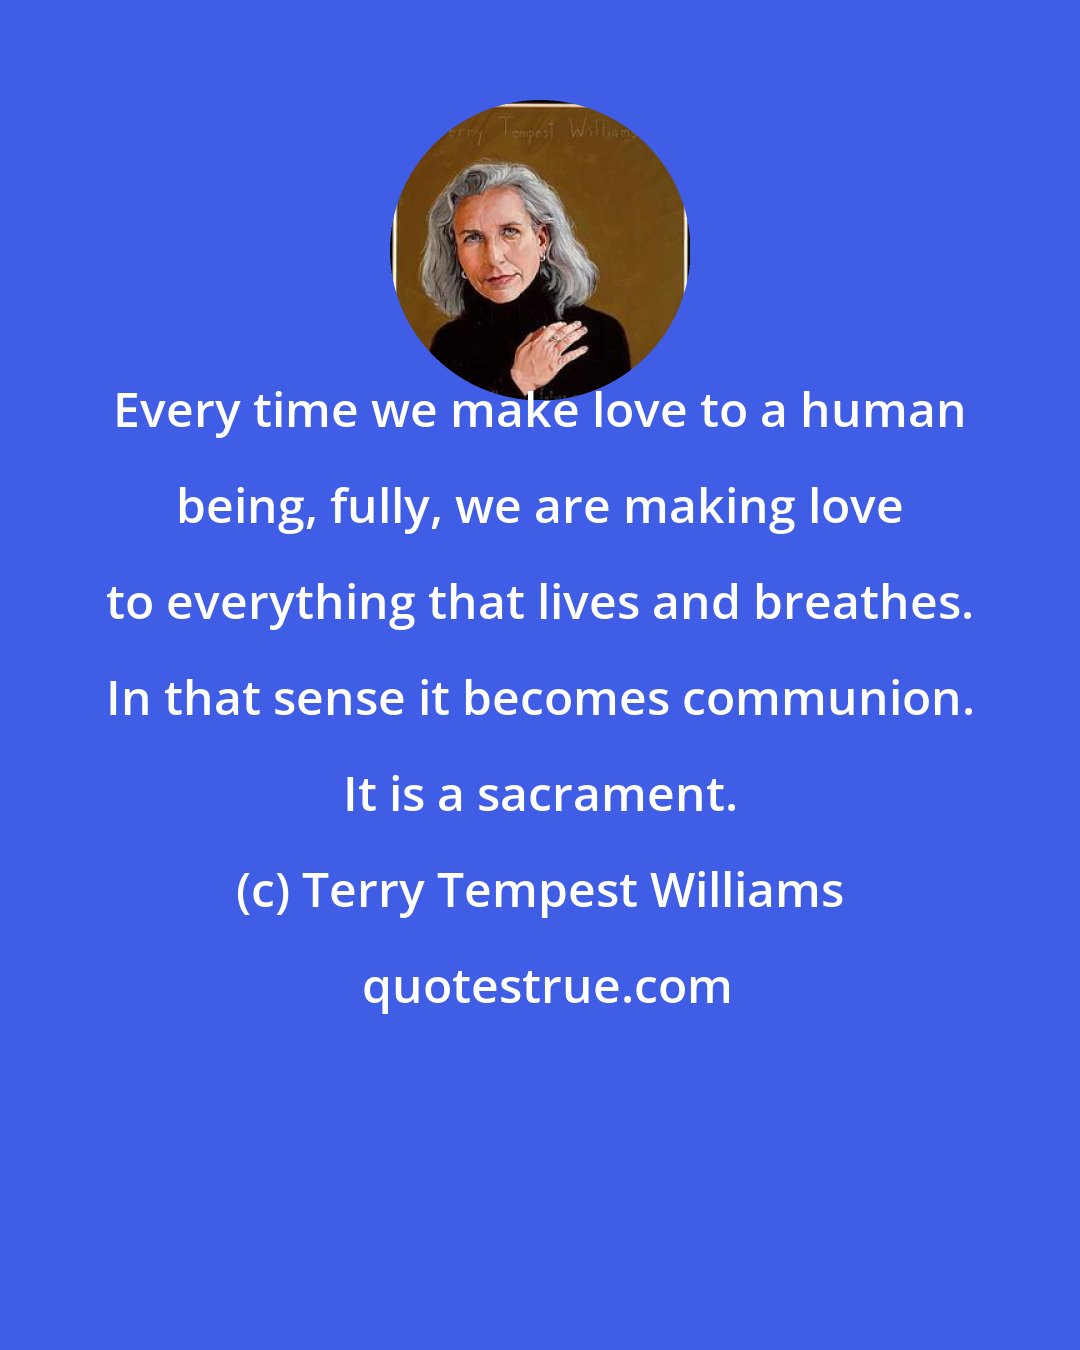 Terry Tempest Williams: Every time we make love to a human being, fully, we are making love to everything that lives and breathes. In that sense it becomes communion. It is a sacrament.